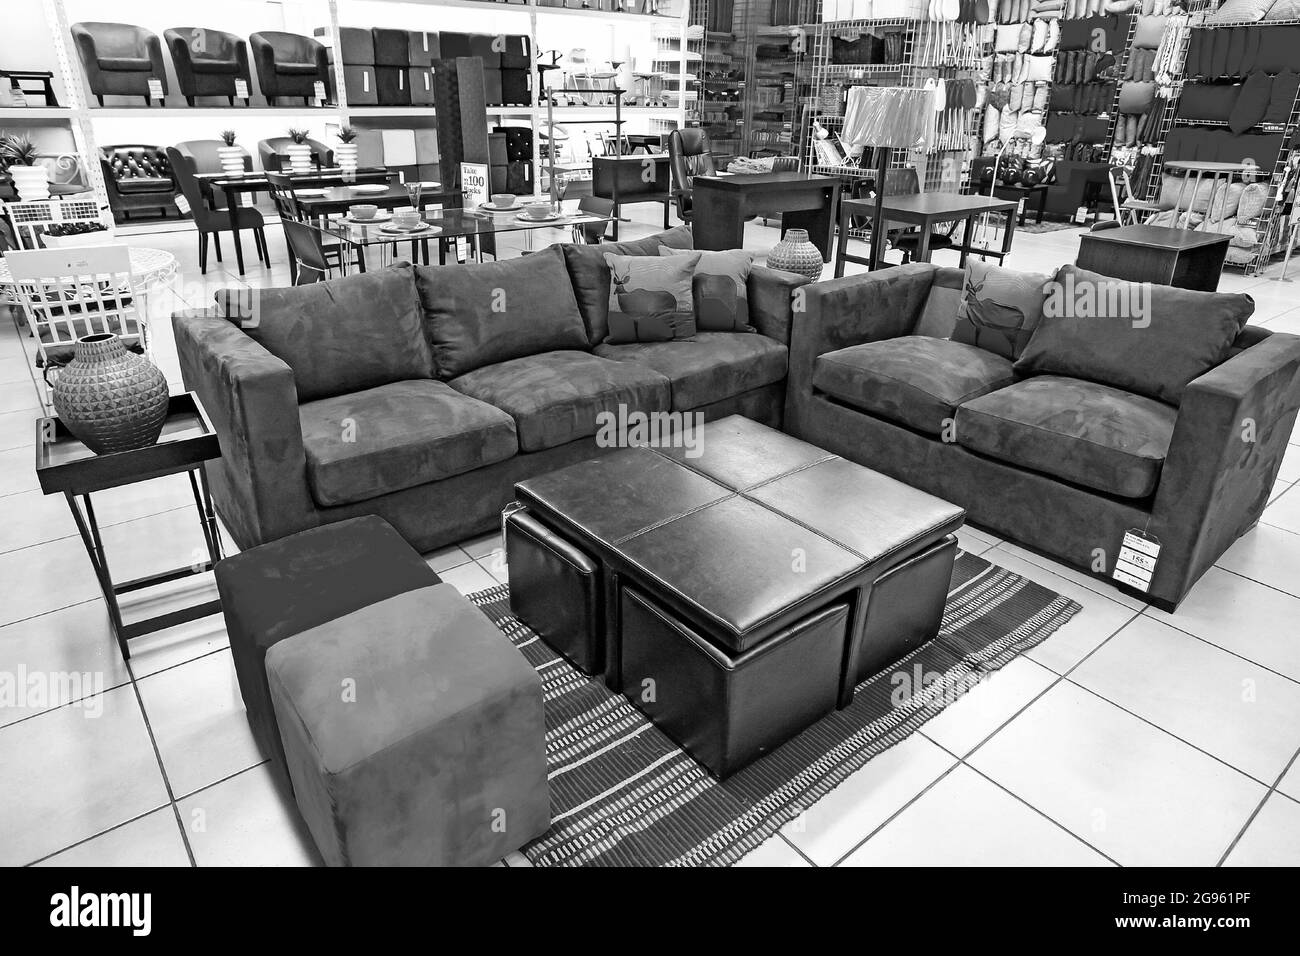 JOHANNESBURG, SOUTH AFRICA - Jan 06, 2021: The inside interior of a home furnishing store Stock Photo